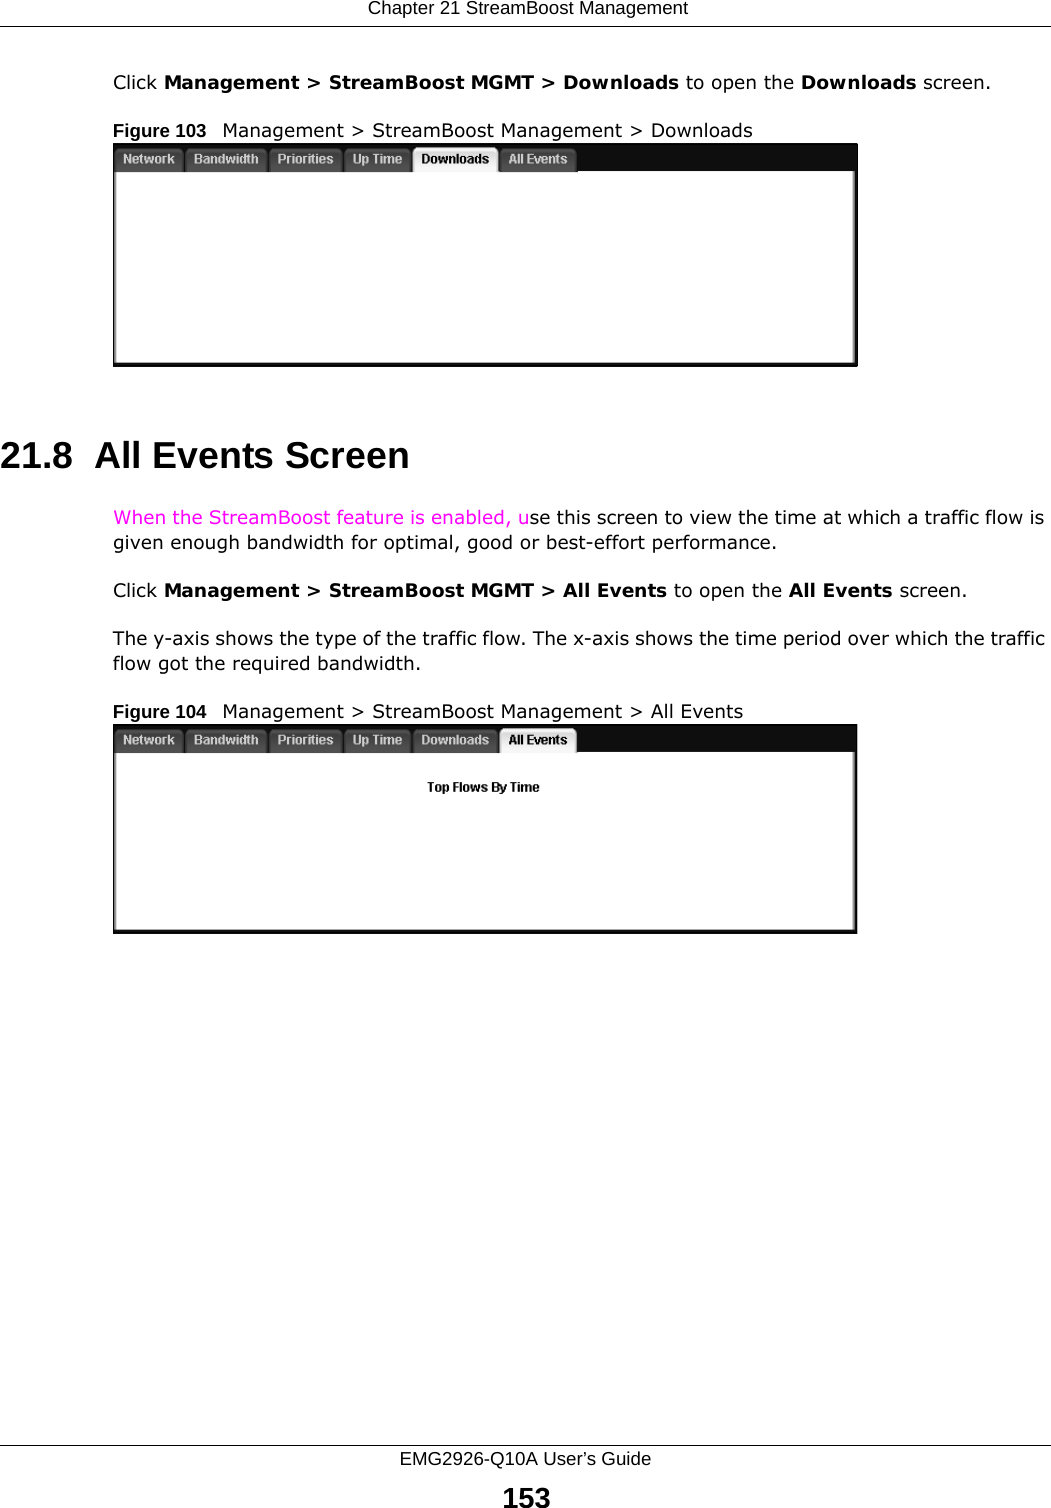  Chapter 21 StreamBoost ManagementEMG2926-Q10A User’s Guide153Click Management &gt; StreamBoost MGMT &gt; Downloads to open the Downloads screen.Figure 103   Management &gt; StreamBoost Management &gt; Downloads 21.8  All Events Screen When the StreamBoost feature is enabled, use this screen to view the time at which a traffic flow is given enough bandwidth for optimal, good or best-effort performance.Click Management &gt; StreamBoost MGMT &gt; All Events to open the All Events screen.The y-axis shows the type of the traffic flow. The x-axis shows the time period over which the traffic flow got the required bandwidth. Figure 104   Management &gt; StreamBoost Management &gt; All Events 